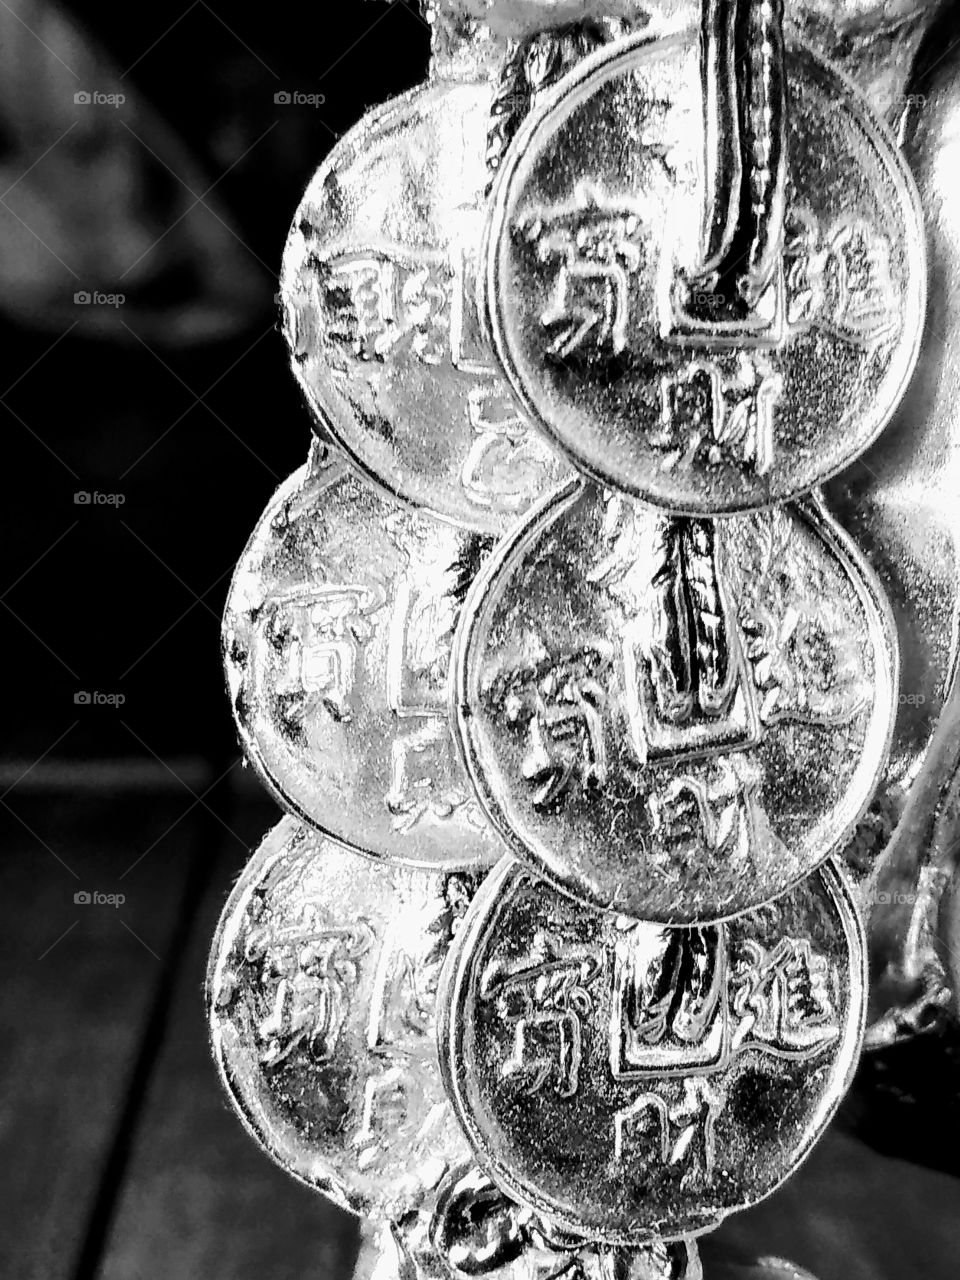 Chinese feng shui coins